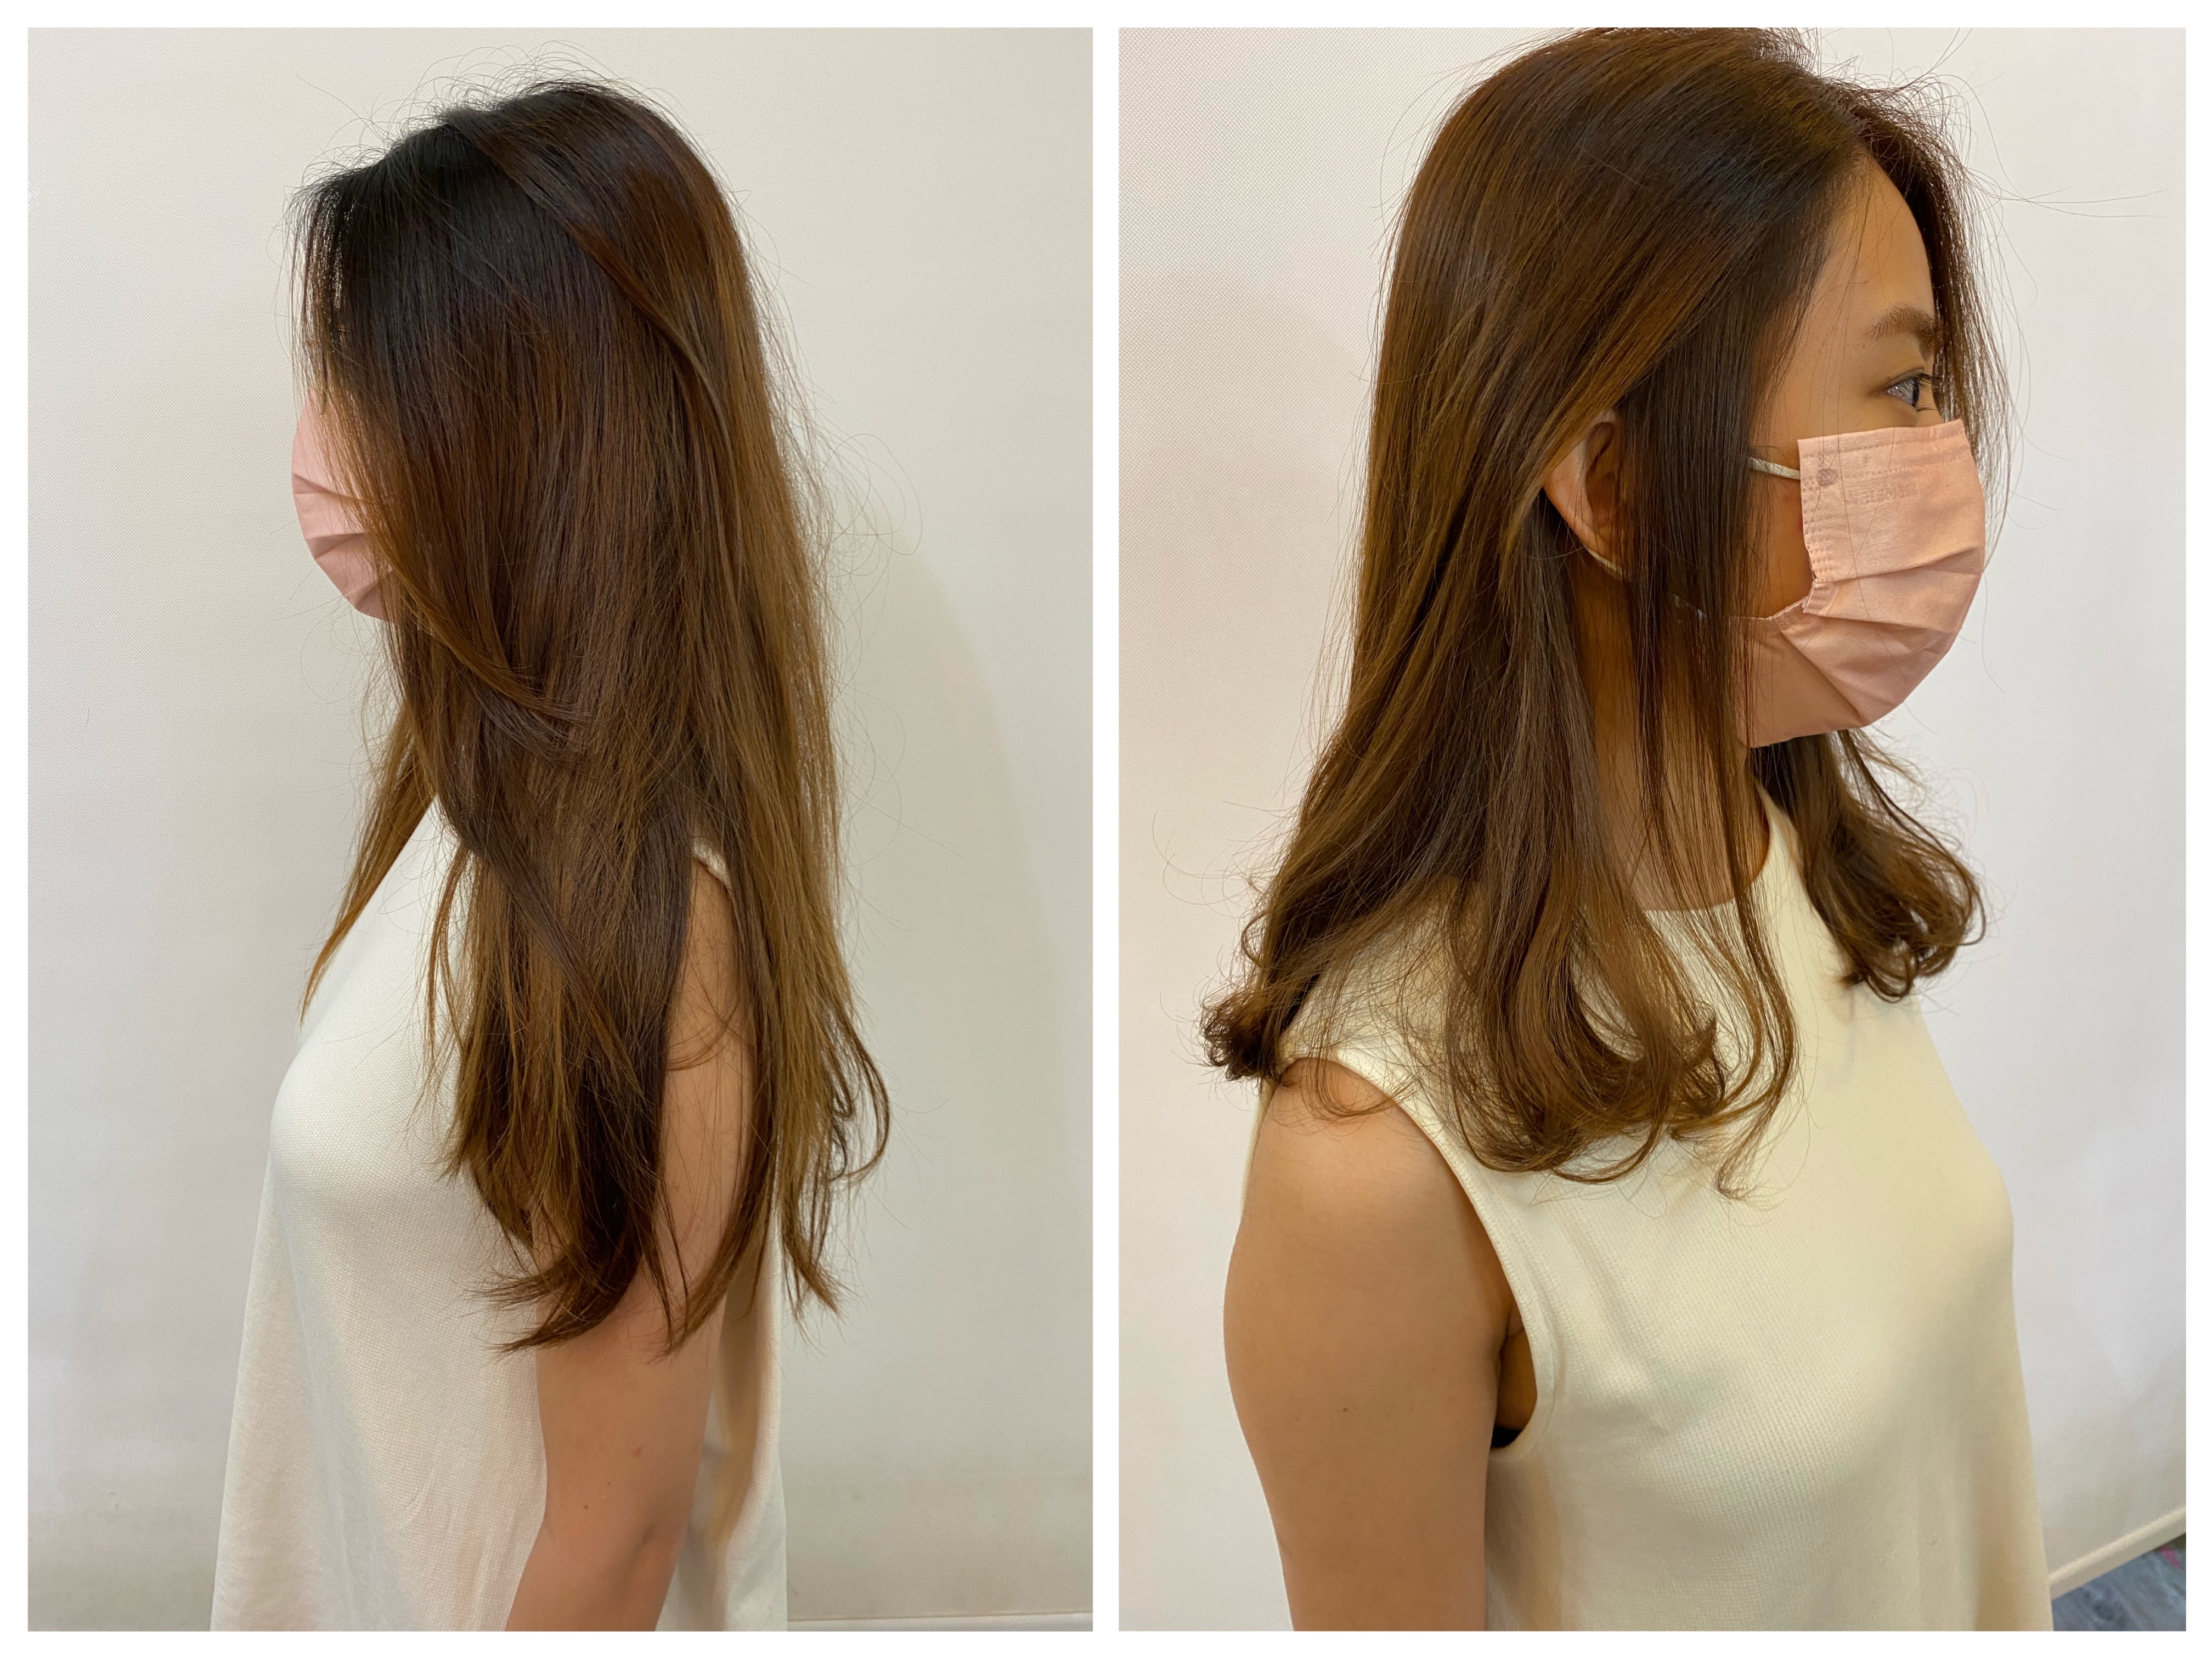 2 Section Hair之髮型作品: Natural curly perm